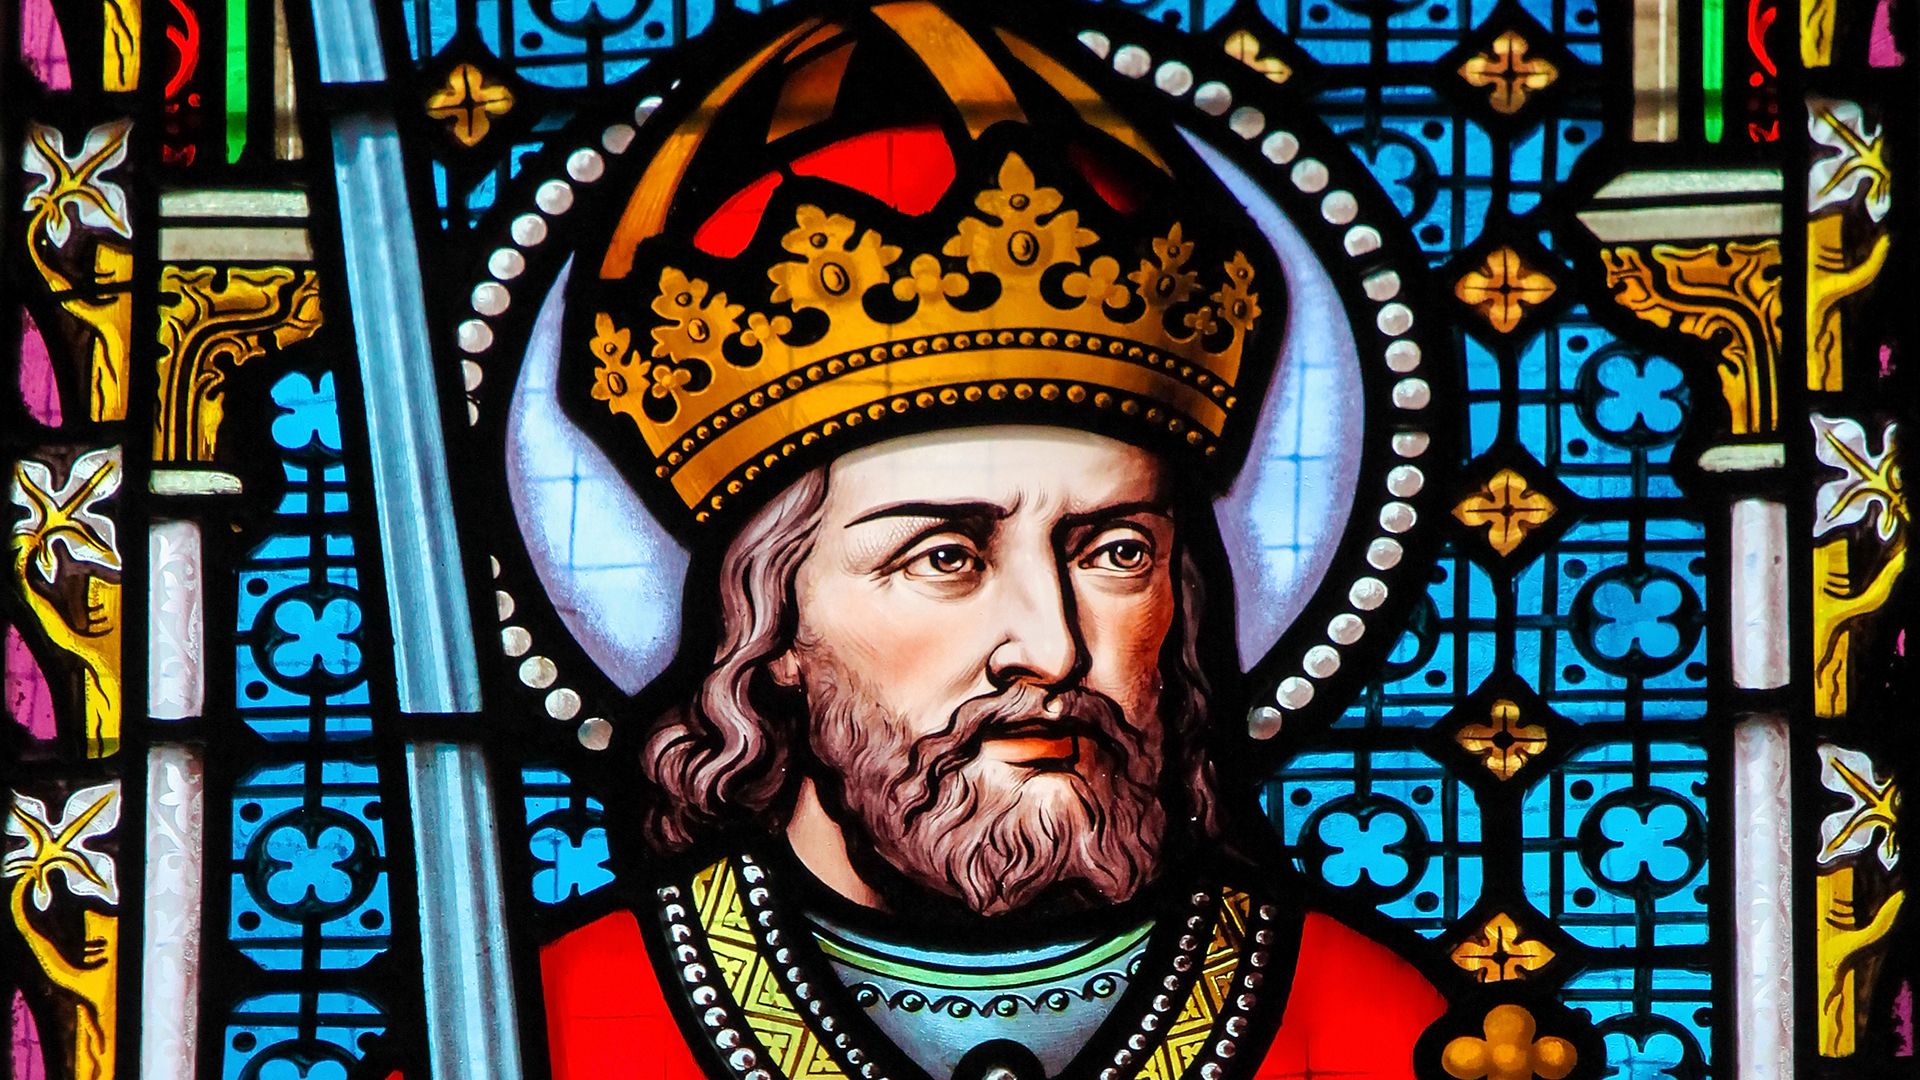 The reign of Charlemagne and his conquest of the Saxons